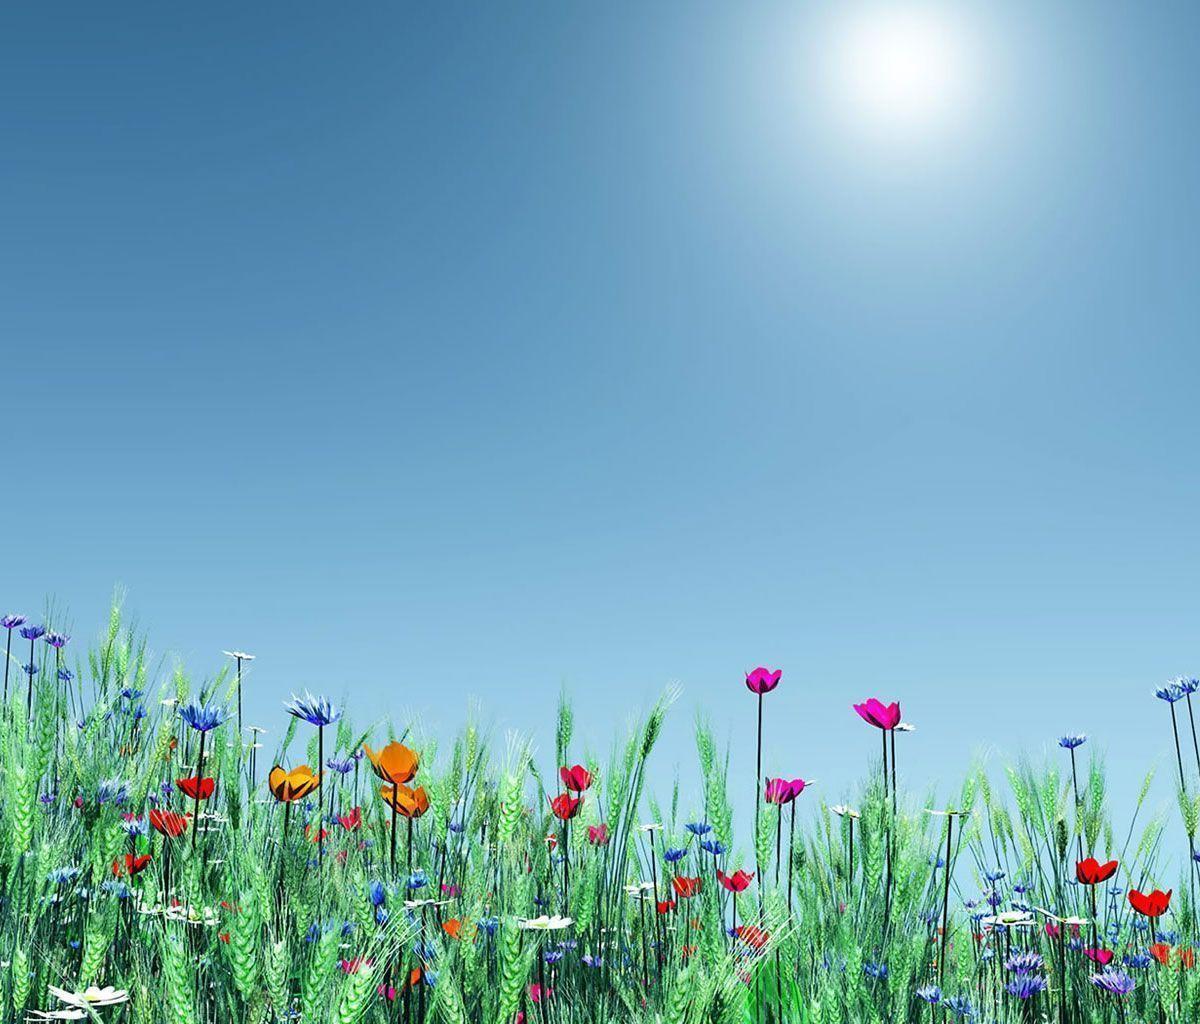 Flower Background for Android Tablets 08. Tablet Wallpaper